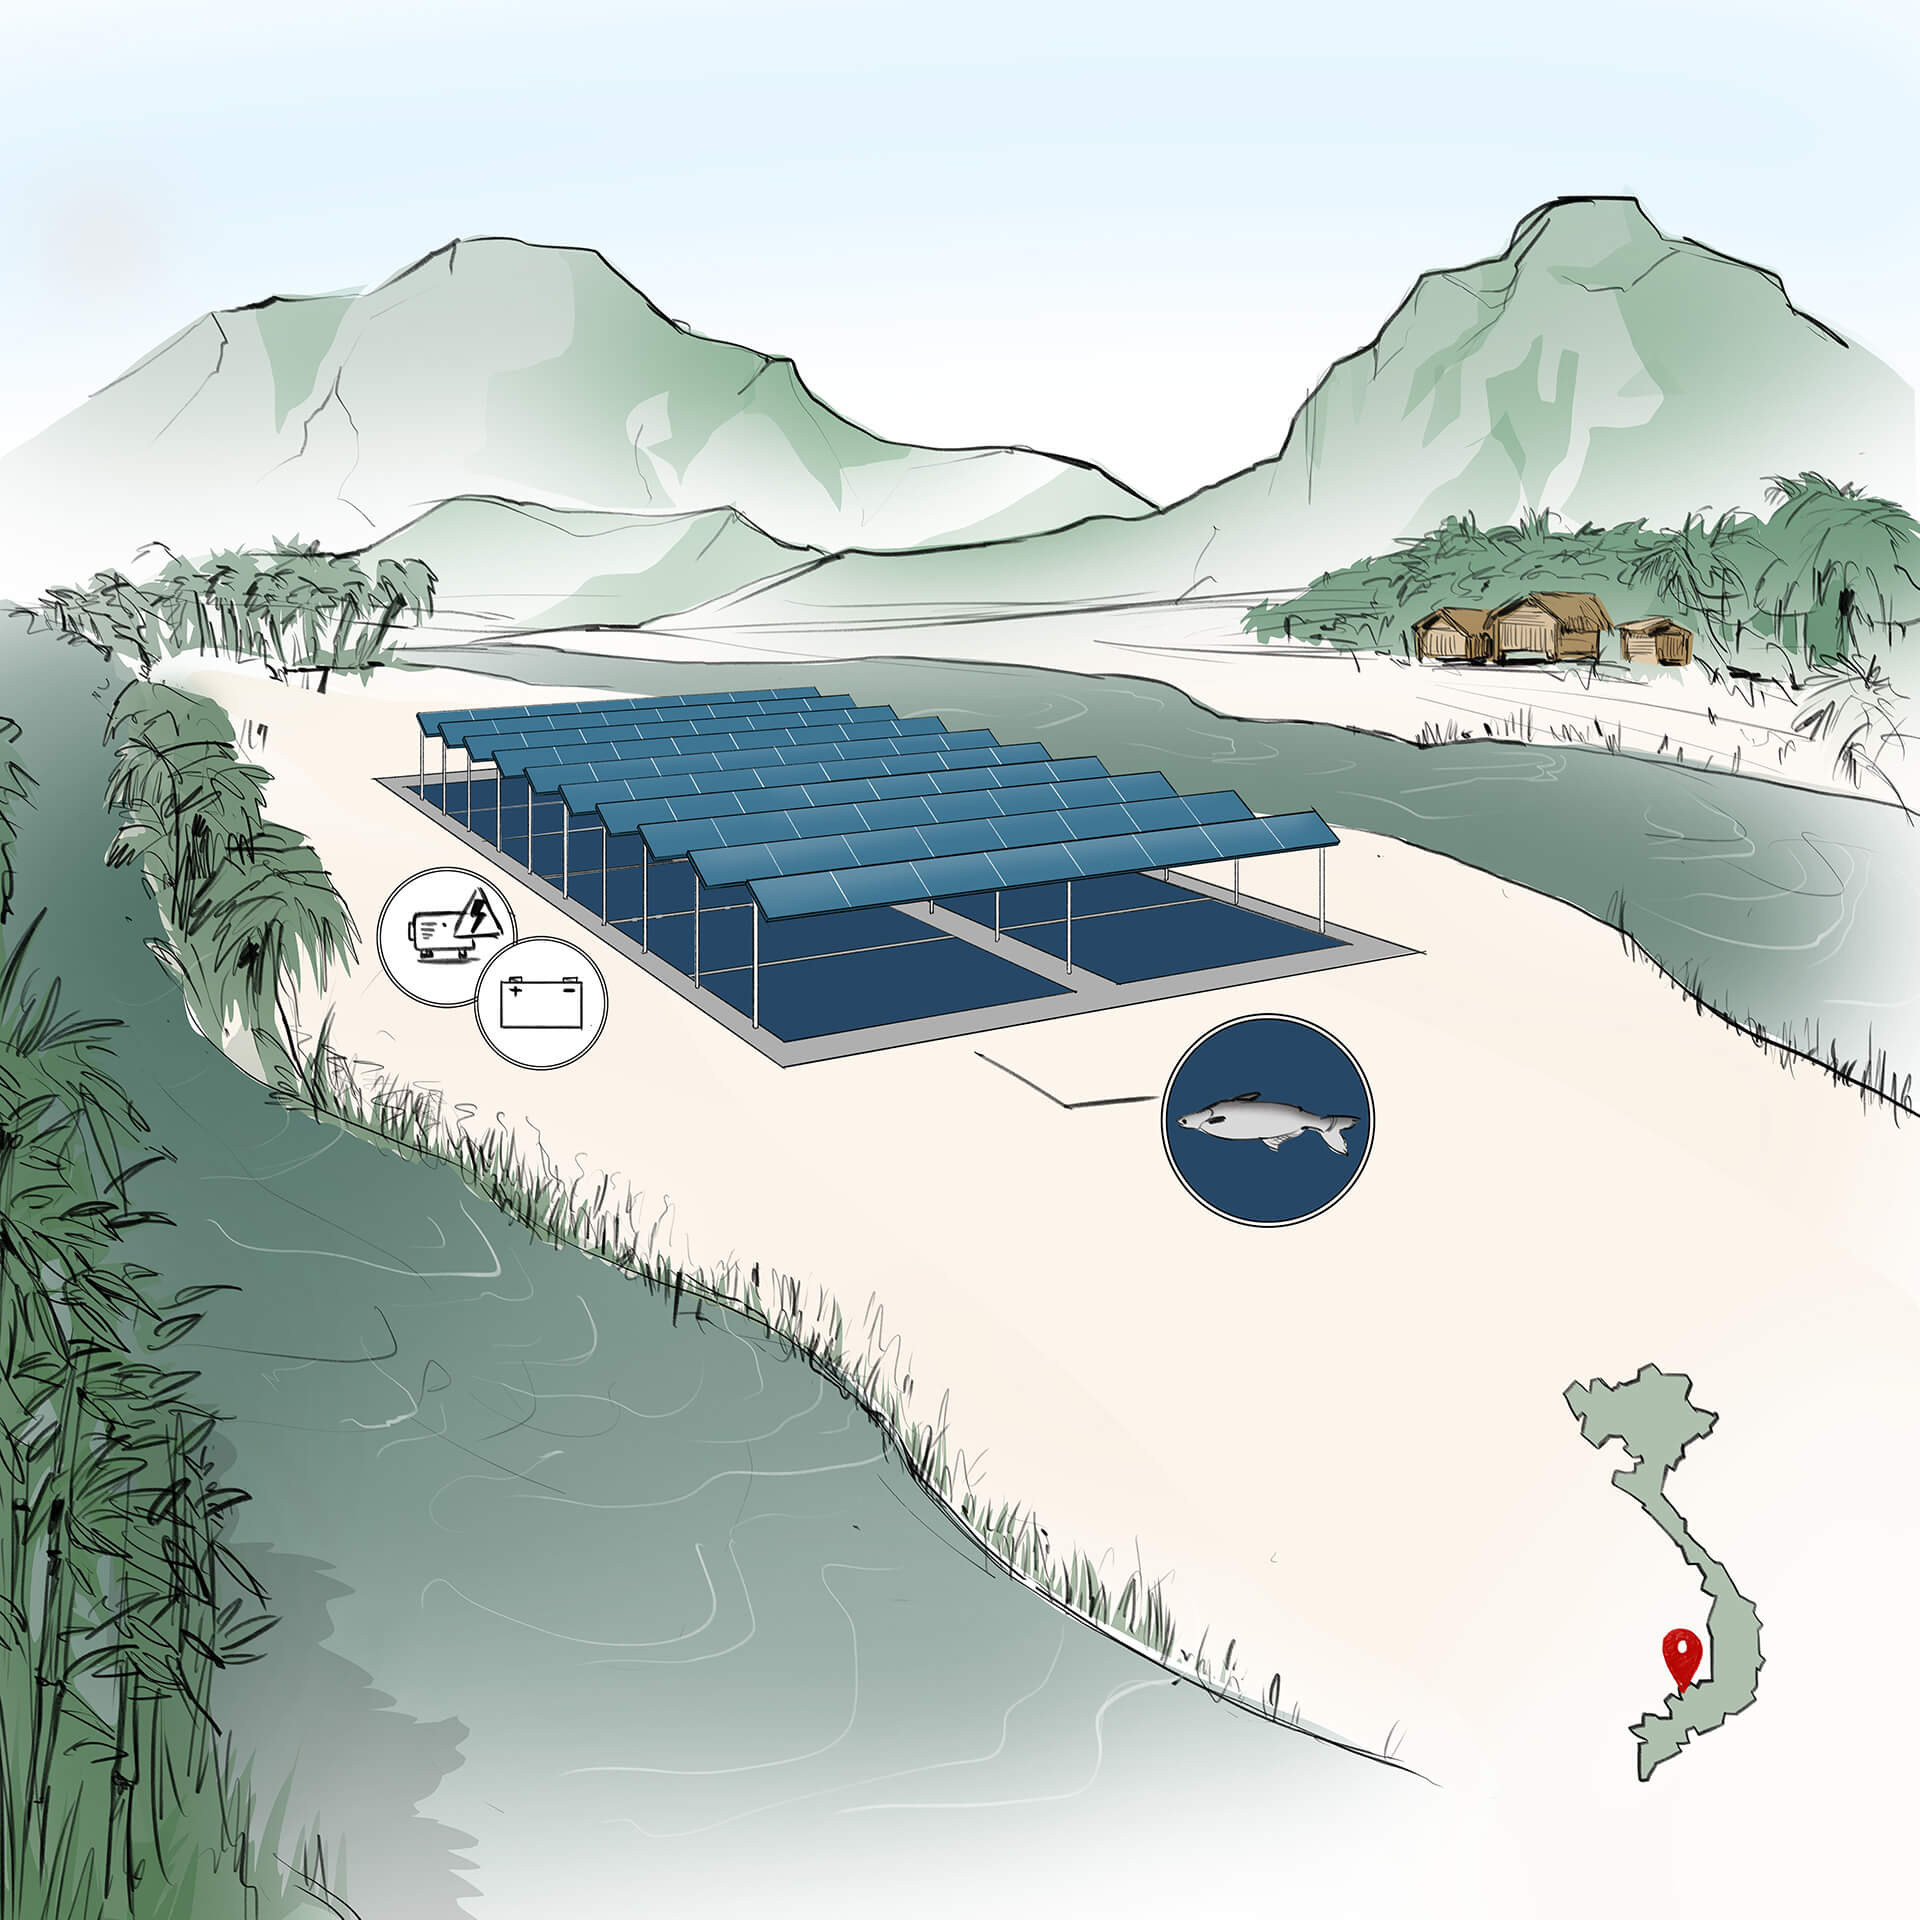 Planned pangasius photovoltaic plant